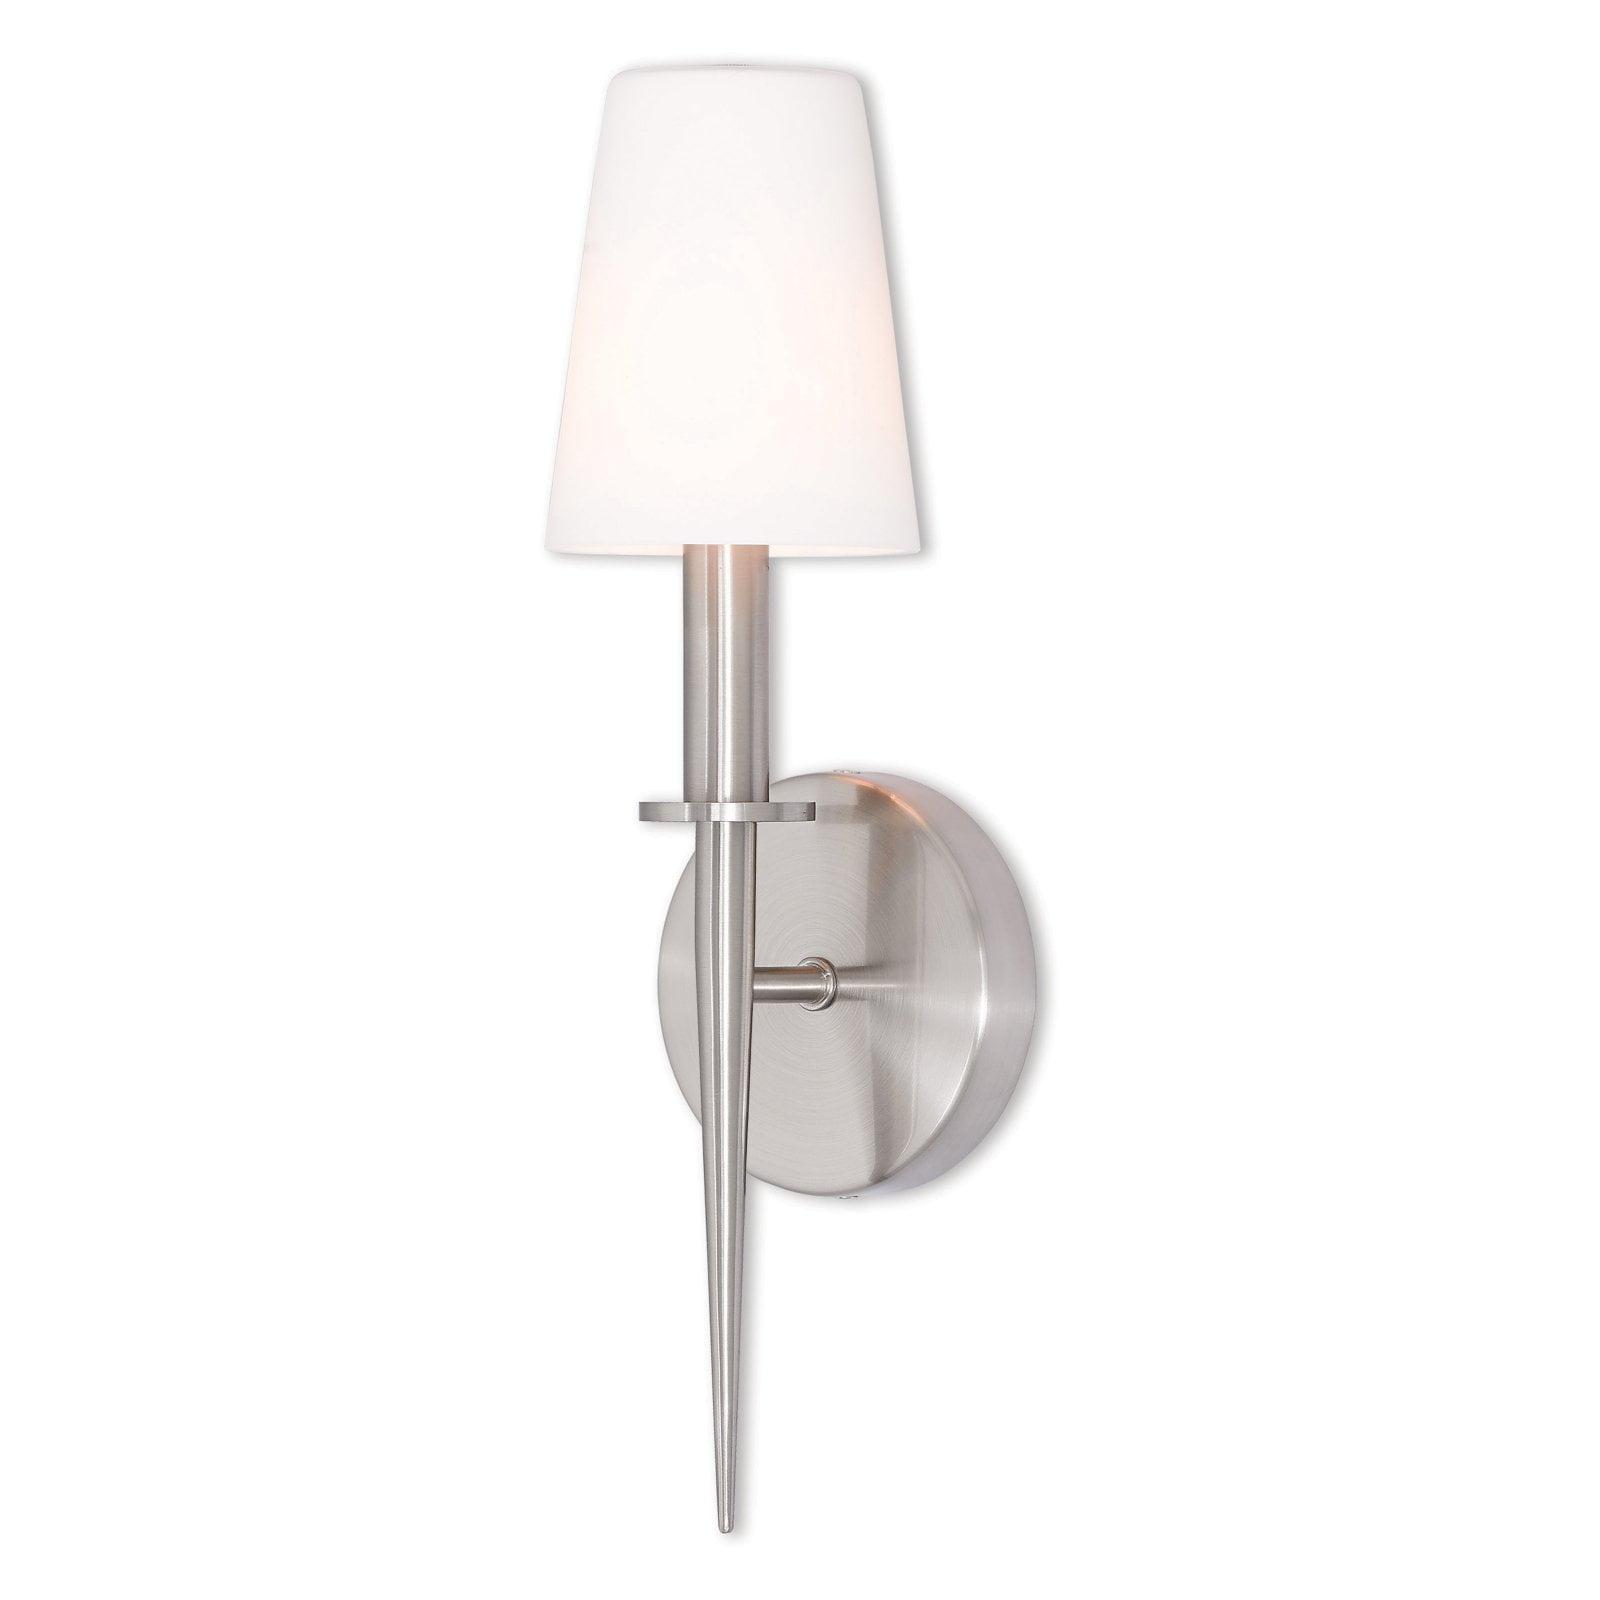 Witten Brushed Nickel 1-Light ADA Compliant Sconce with Opal White Glass